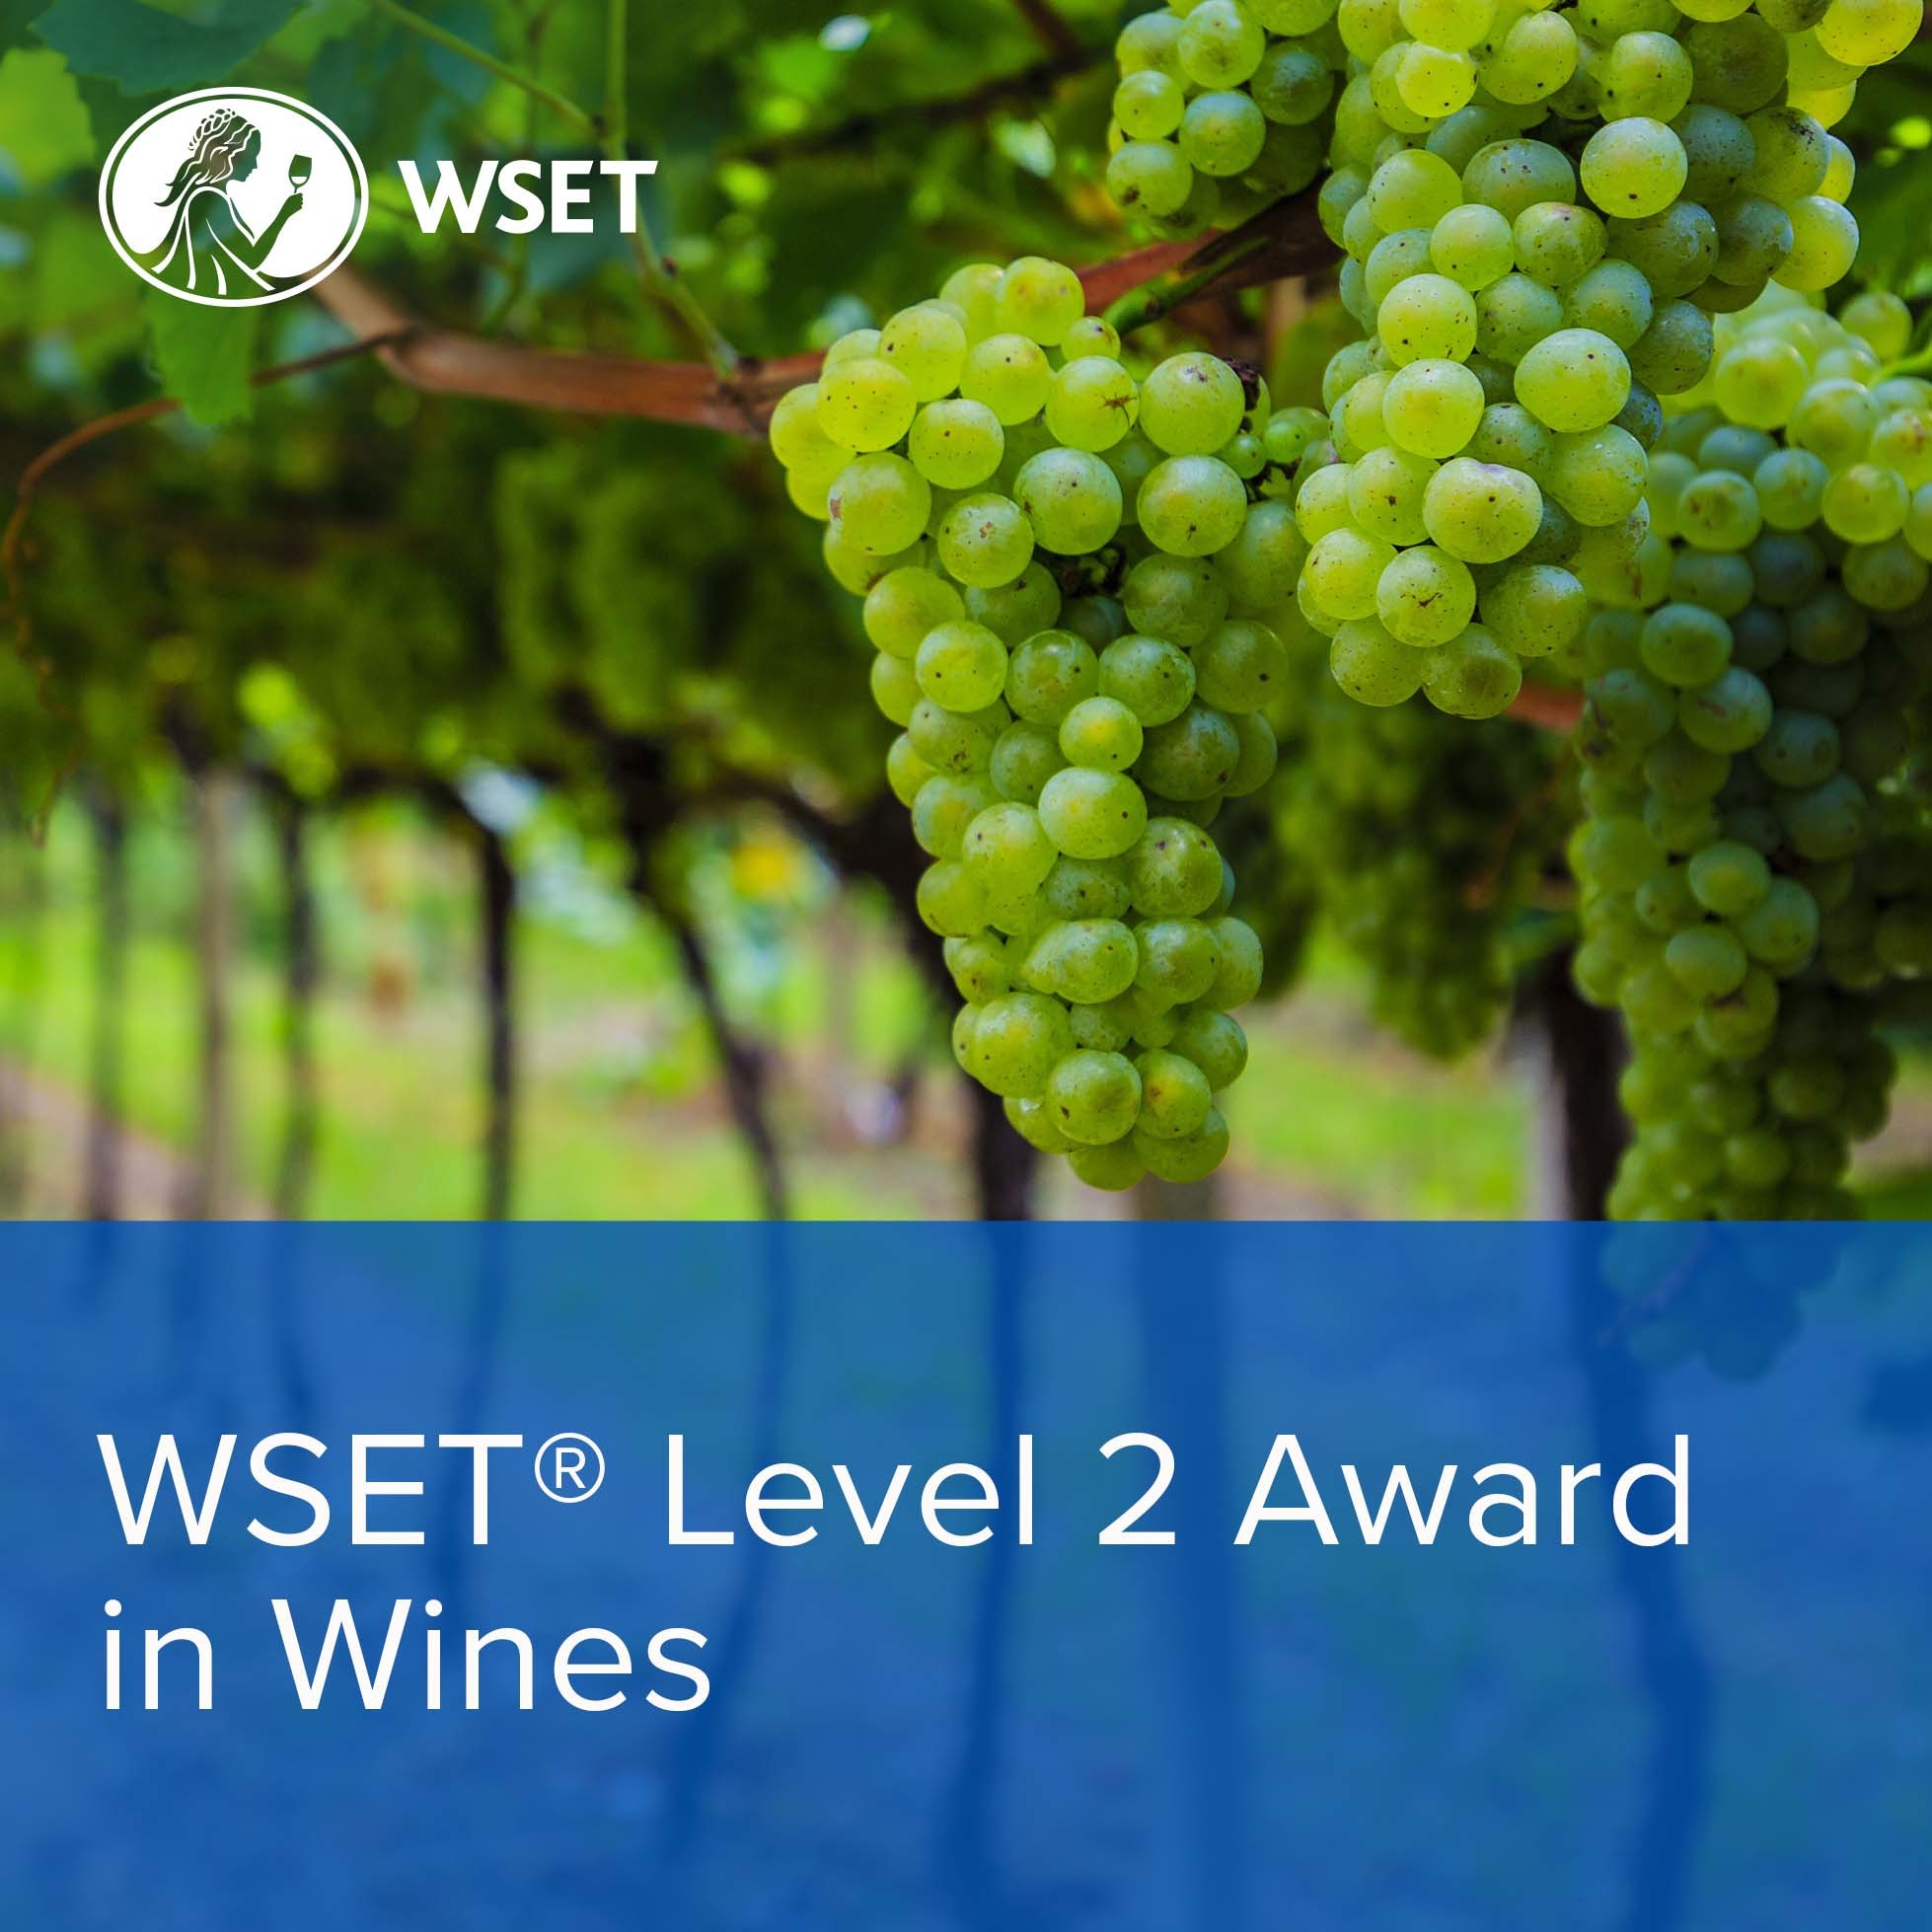  WSET Level 2 Award in Wines Course: Sunday Format (Classroom)     